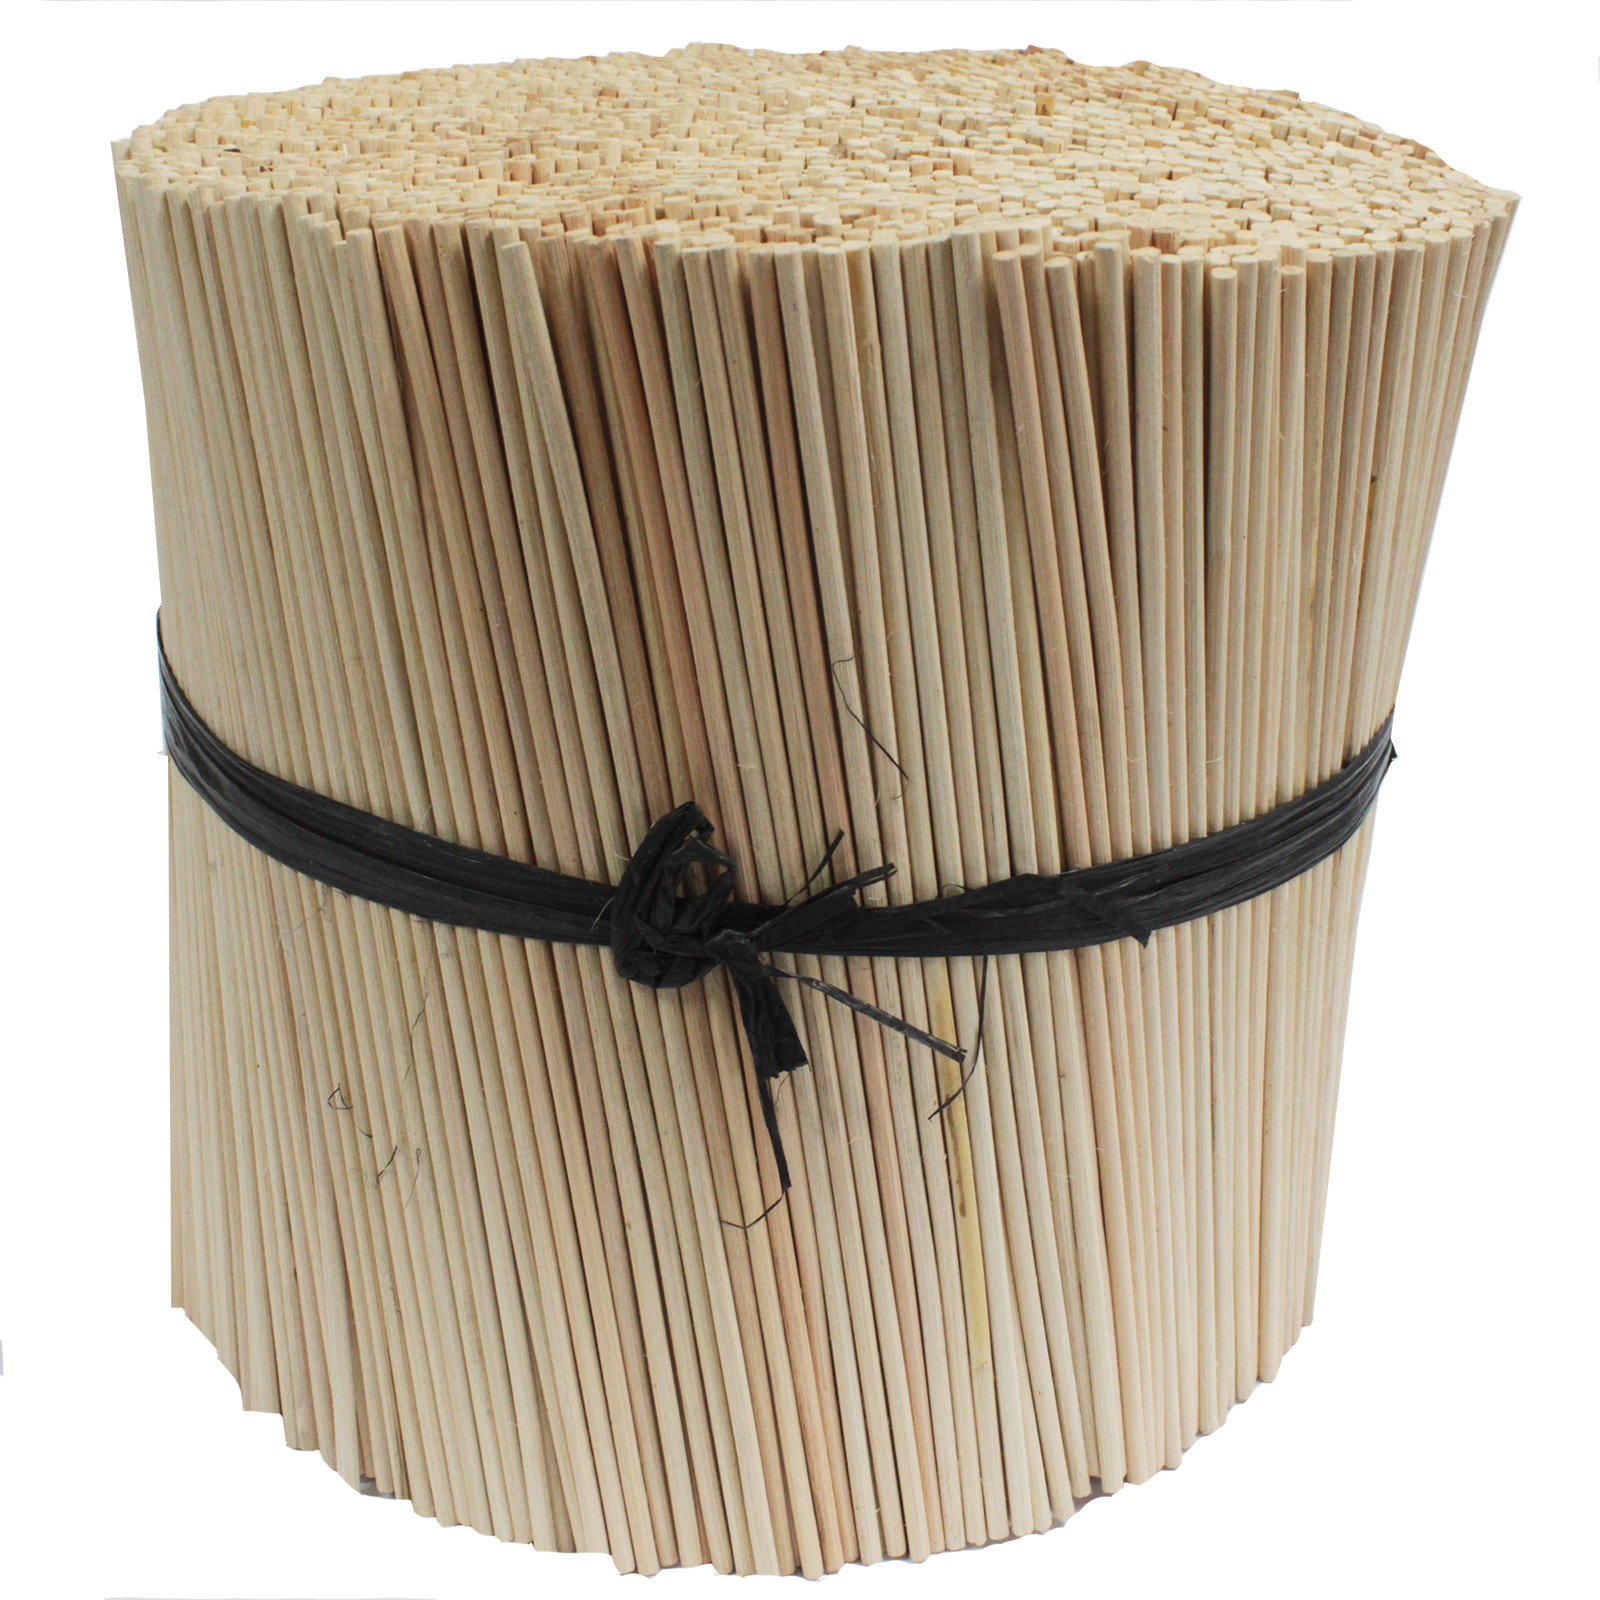 5kg of 3mm Reed Diffusers Approx 3600